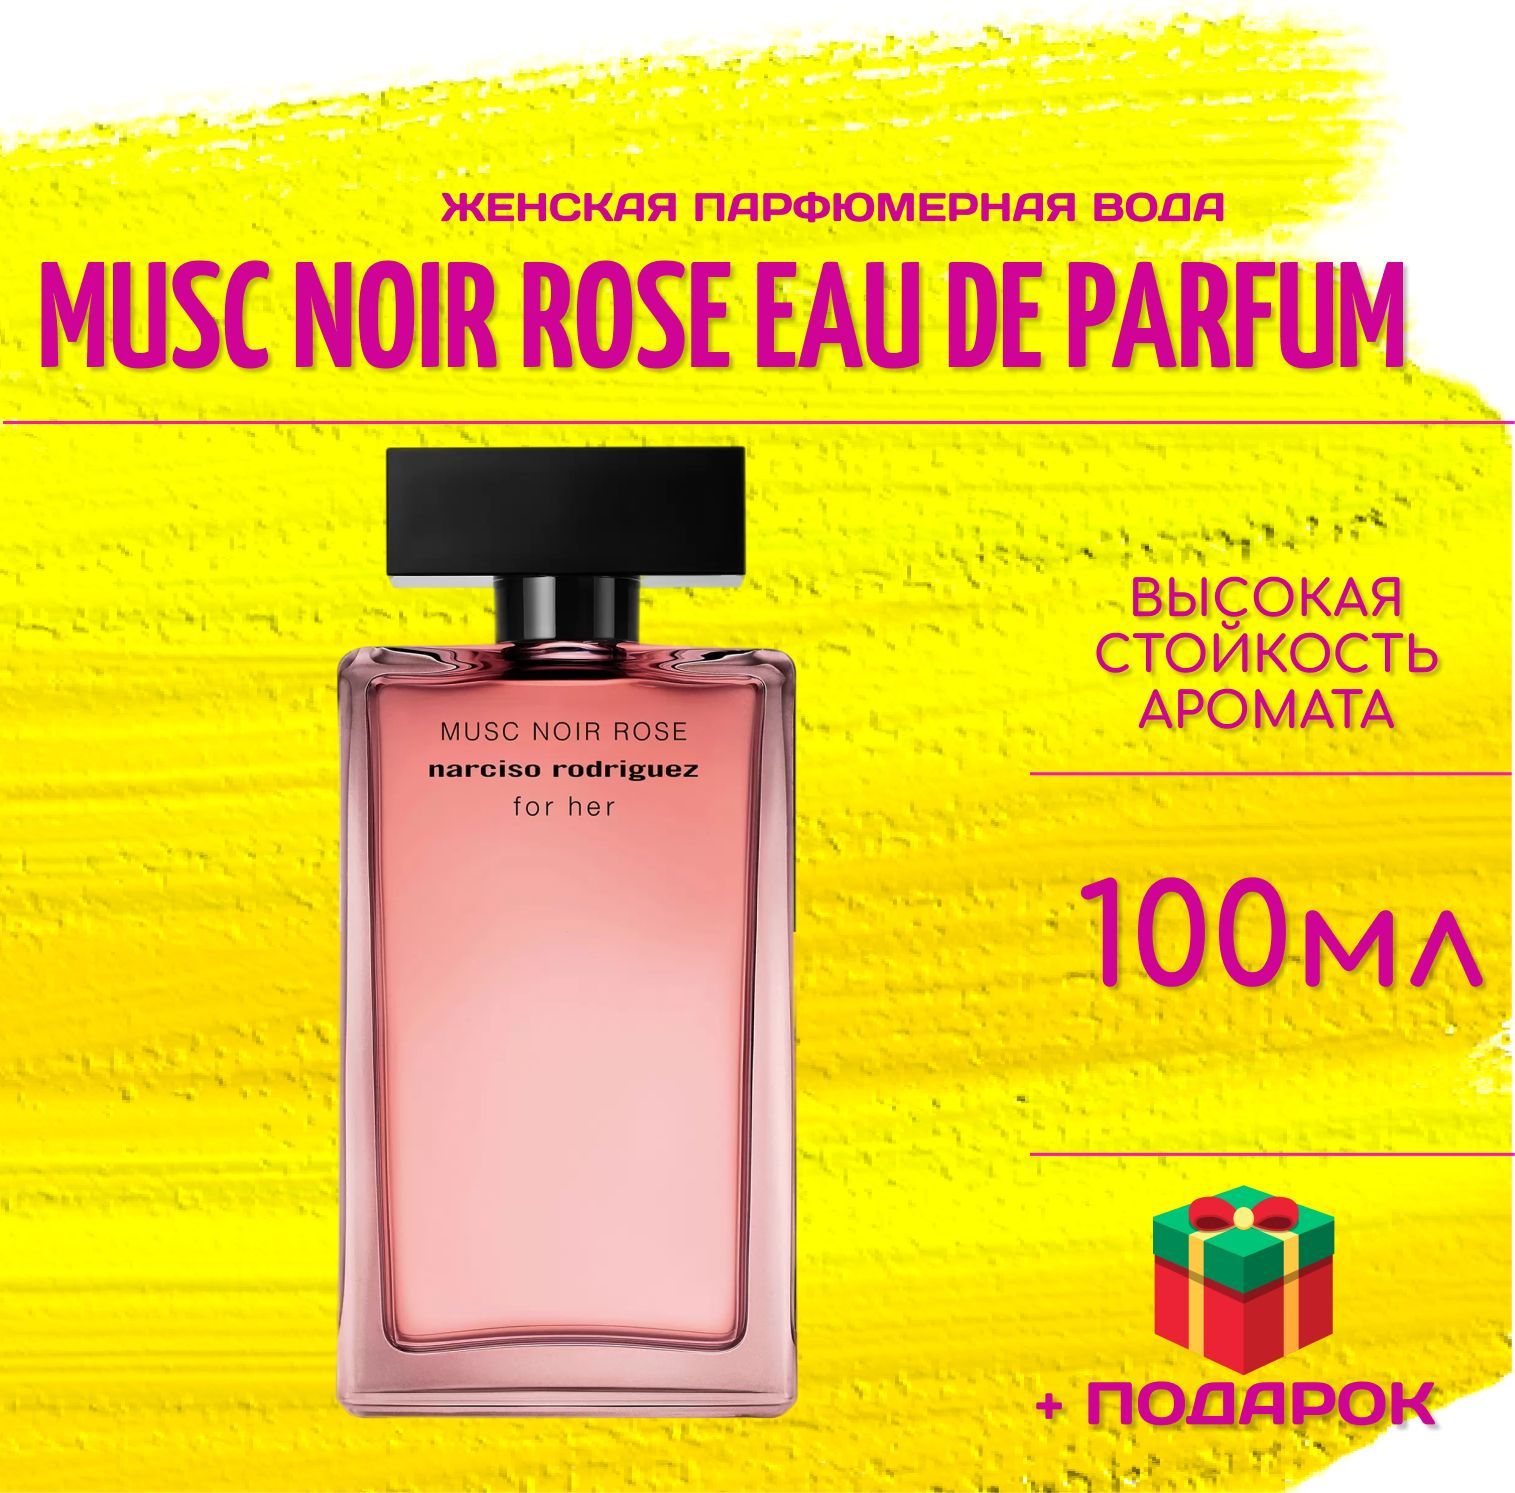 Narciso rodriguez musc noir rose for her. Парфюм uso Paris Mimosa Narciso отзывы.